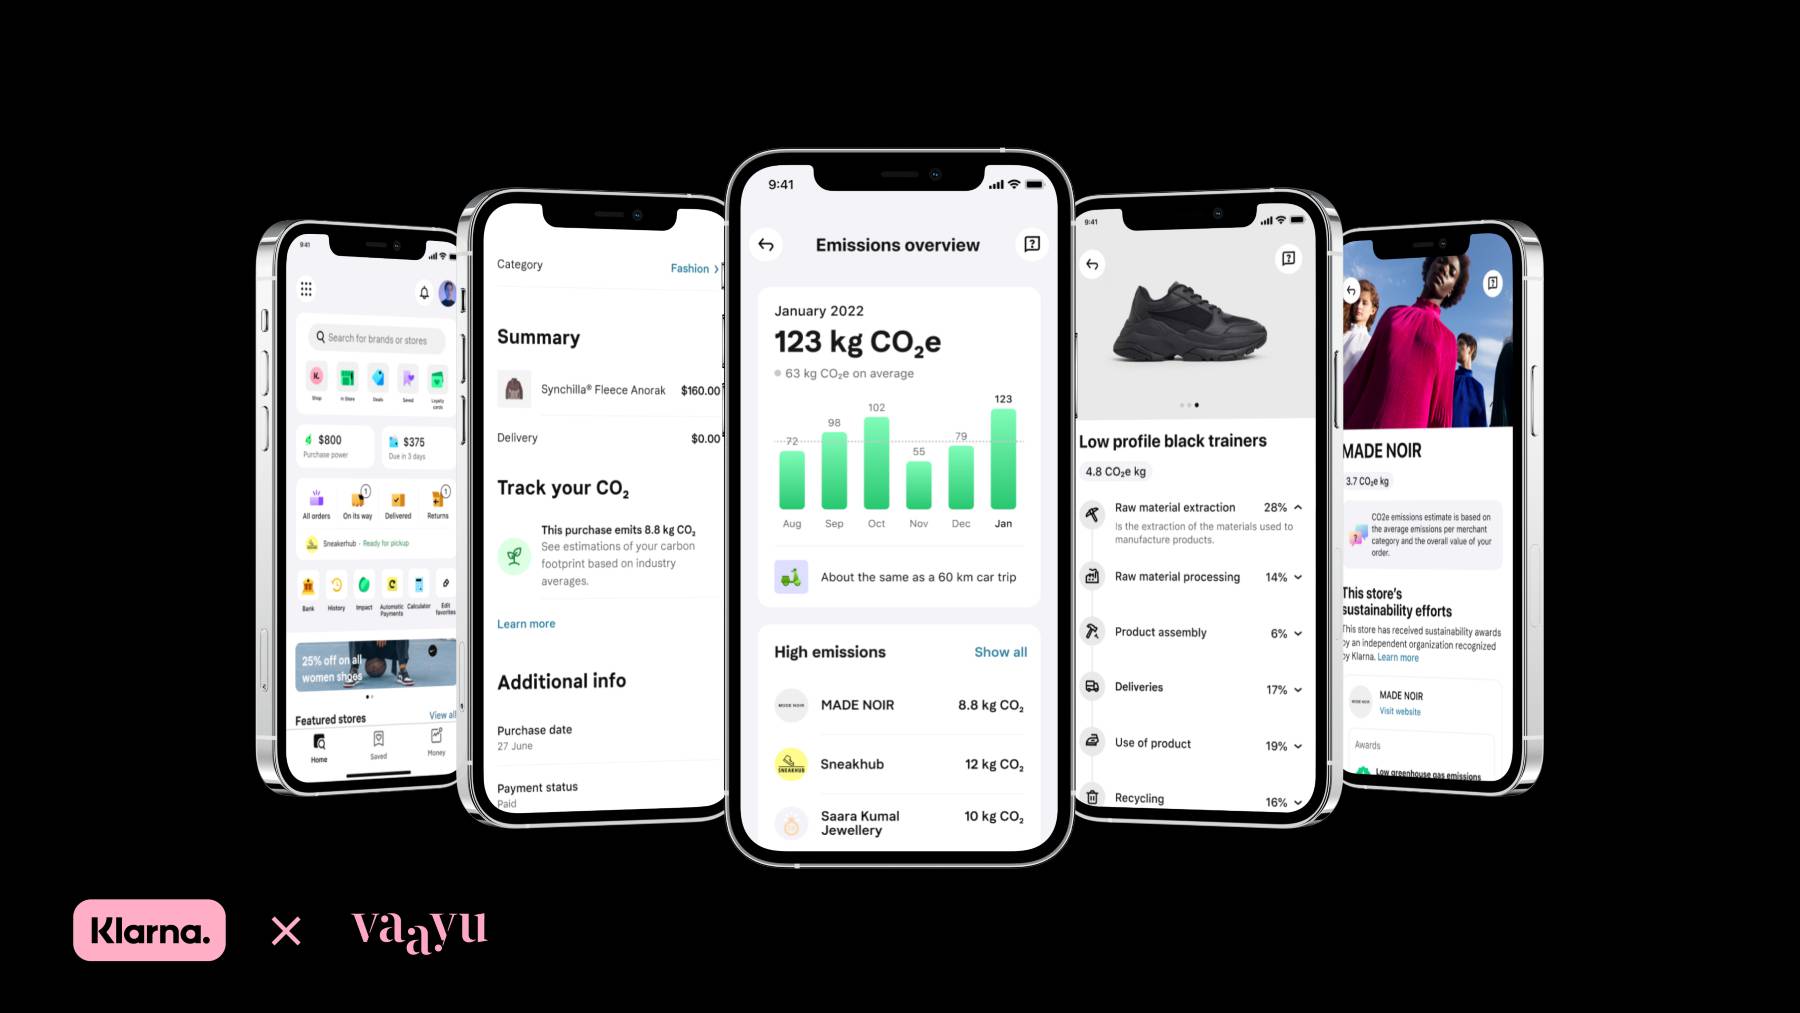 The Klarna app is shown on several phone screens displaying its carbon-tracking feature powered by Vaayu.